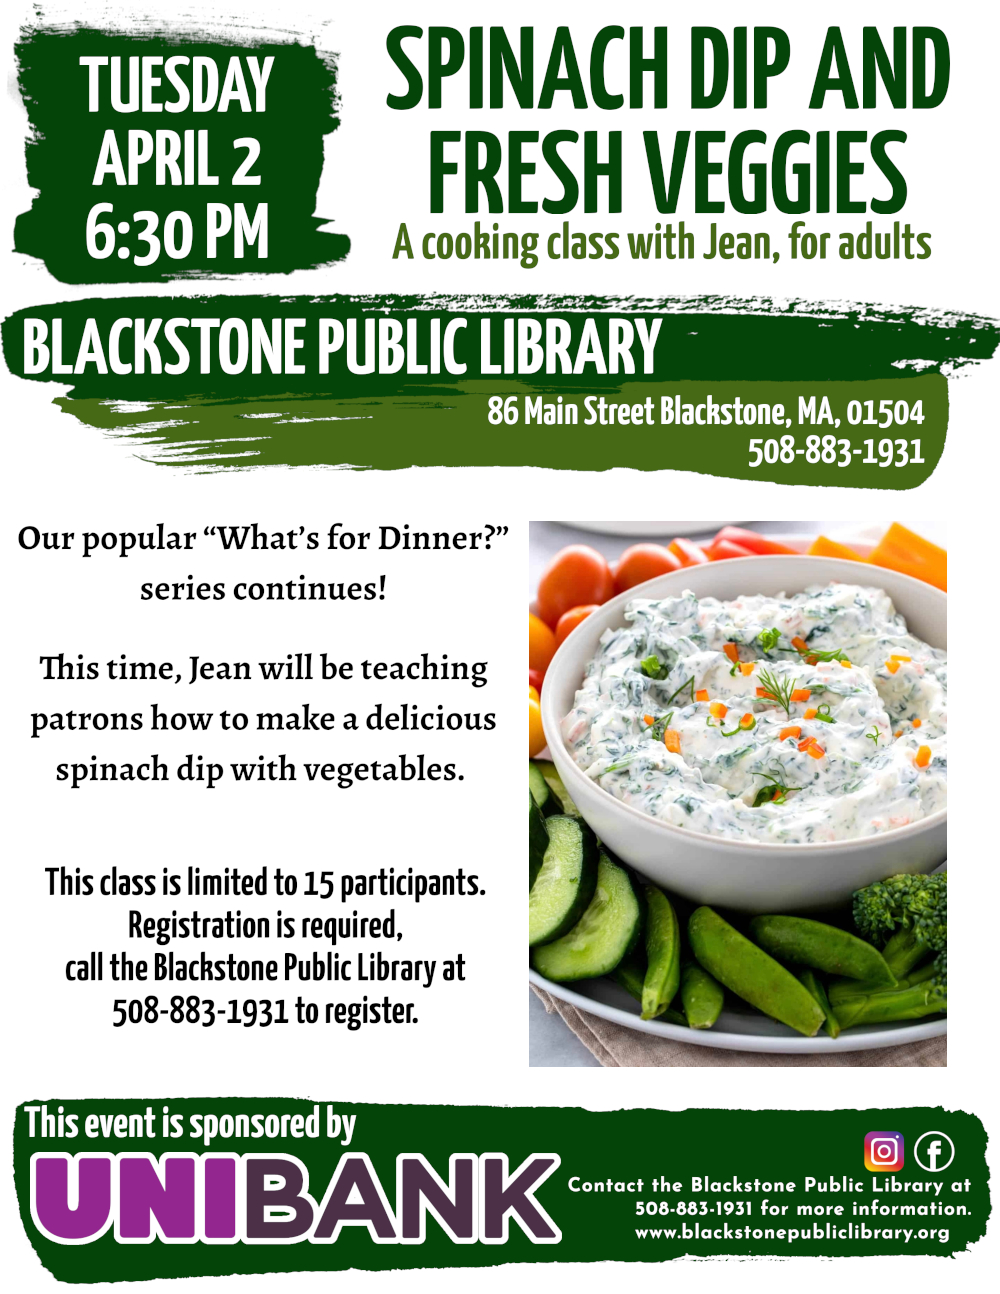 Spinach Dip and Fresh Veggies, a cooking class with Jean, for adults. Tuesday, April 2, 6:30 PM.  Our popular “What’s for Dinner?” series continues! This time, Jean will be teaching patrons how to make a delicious spinach dip with vegetables.   Photograph beside text shows a white bowl filled with savory spinach dip, garnished with dill and small bits of orange pepper. The bowl is surrounded by a selection of fresh broccoli, snap peas, cucumbers, cherry tomatoes, and bell peppers in a variety of colors.   This class is limited to 15 participants. Registration is required, call the  Blackstone Public Library at 508-883-1931 to register, or for more information.  This event is sponsored by Unibank.